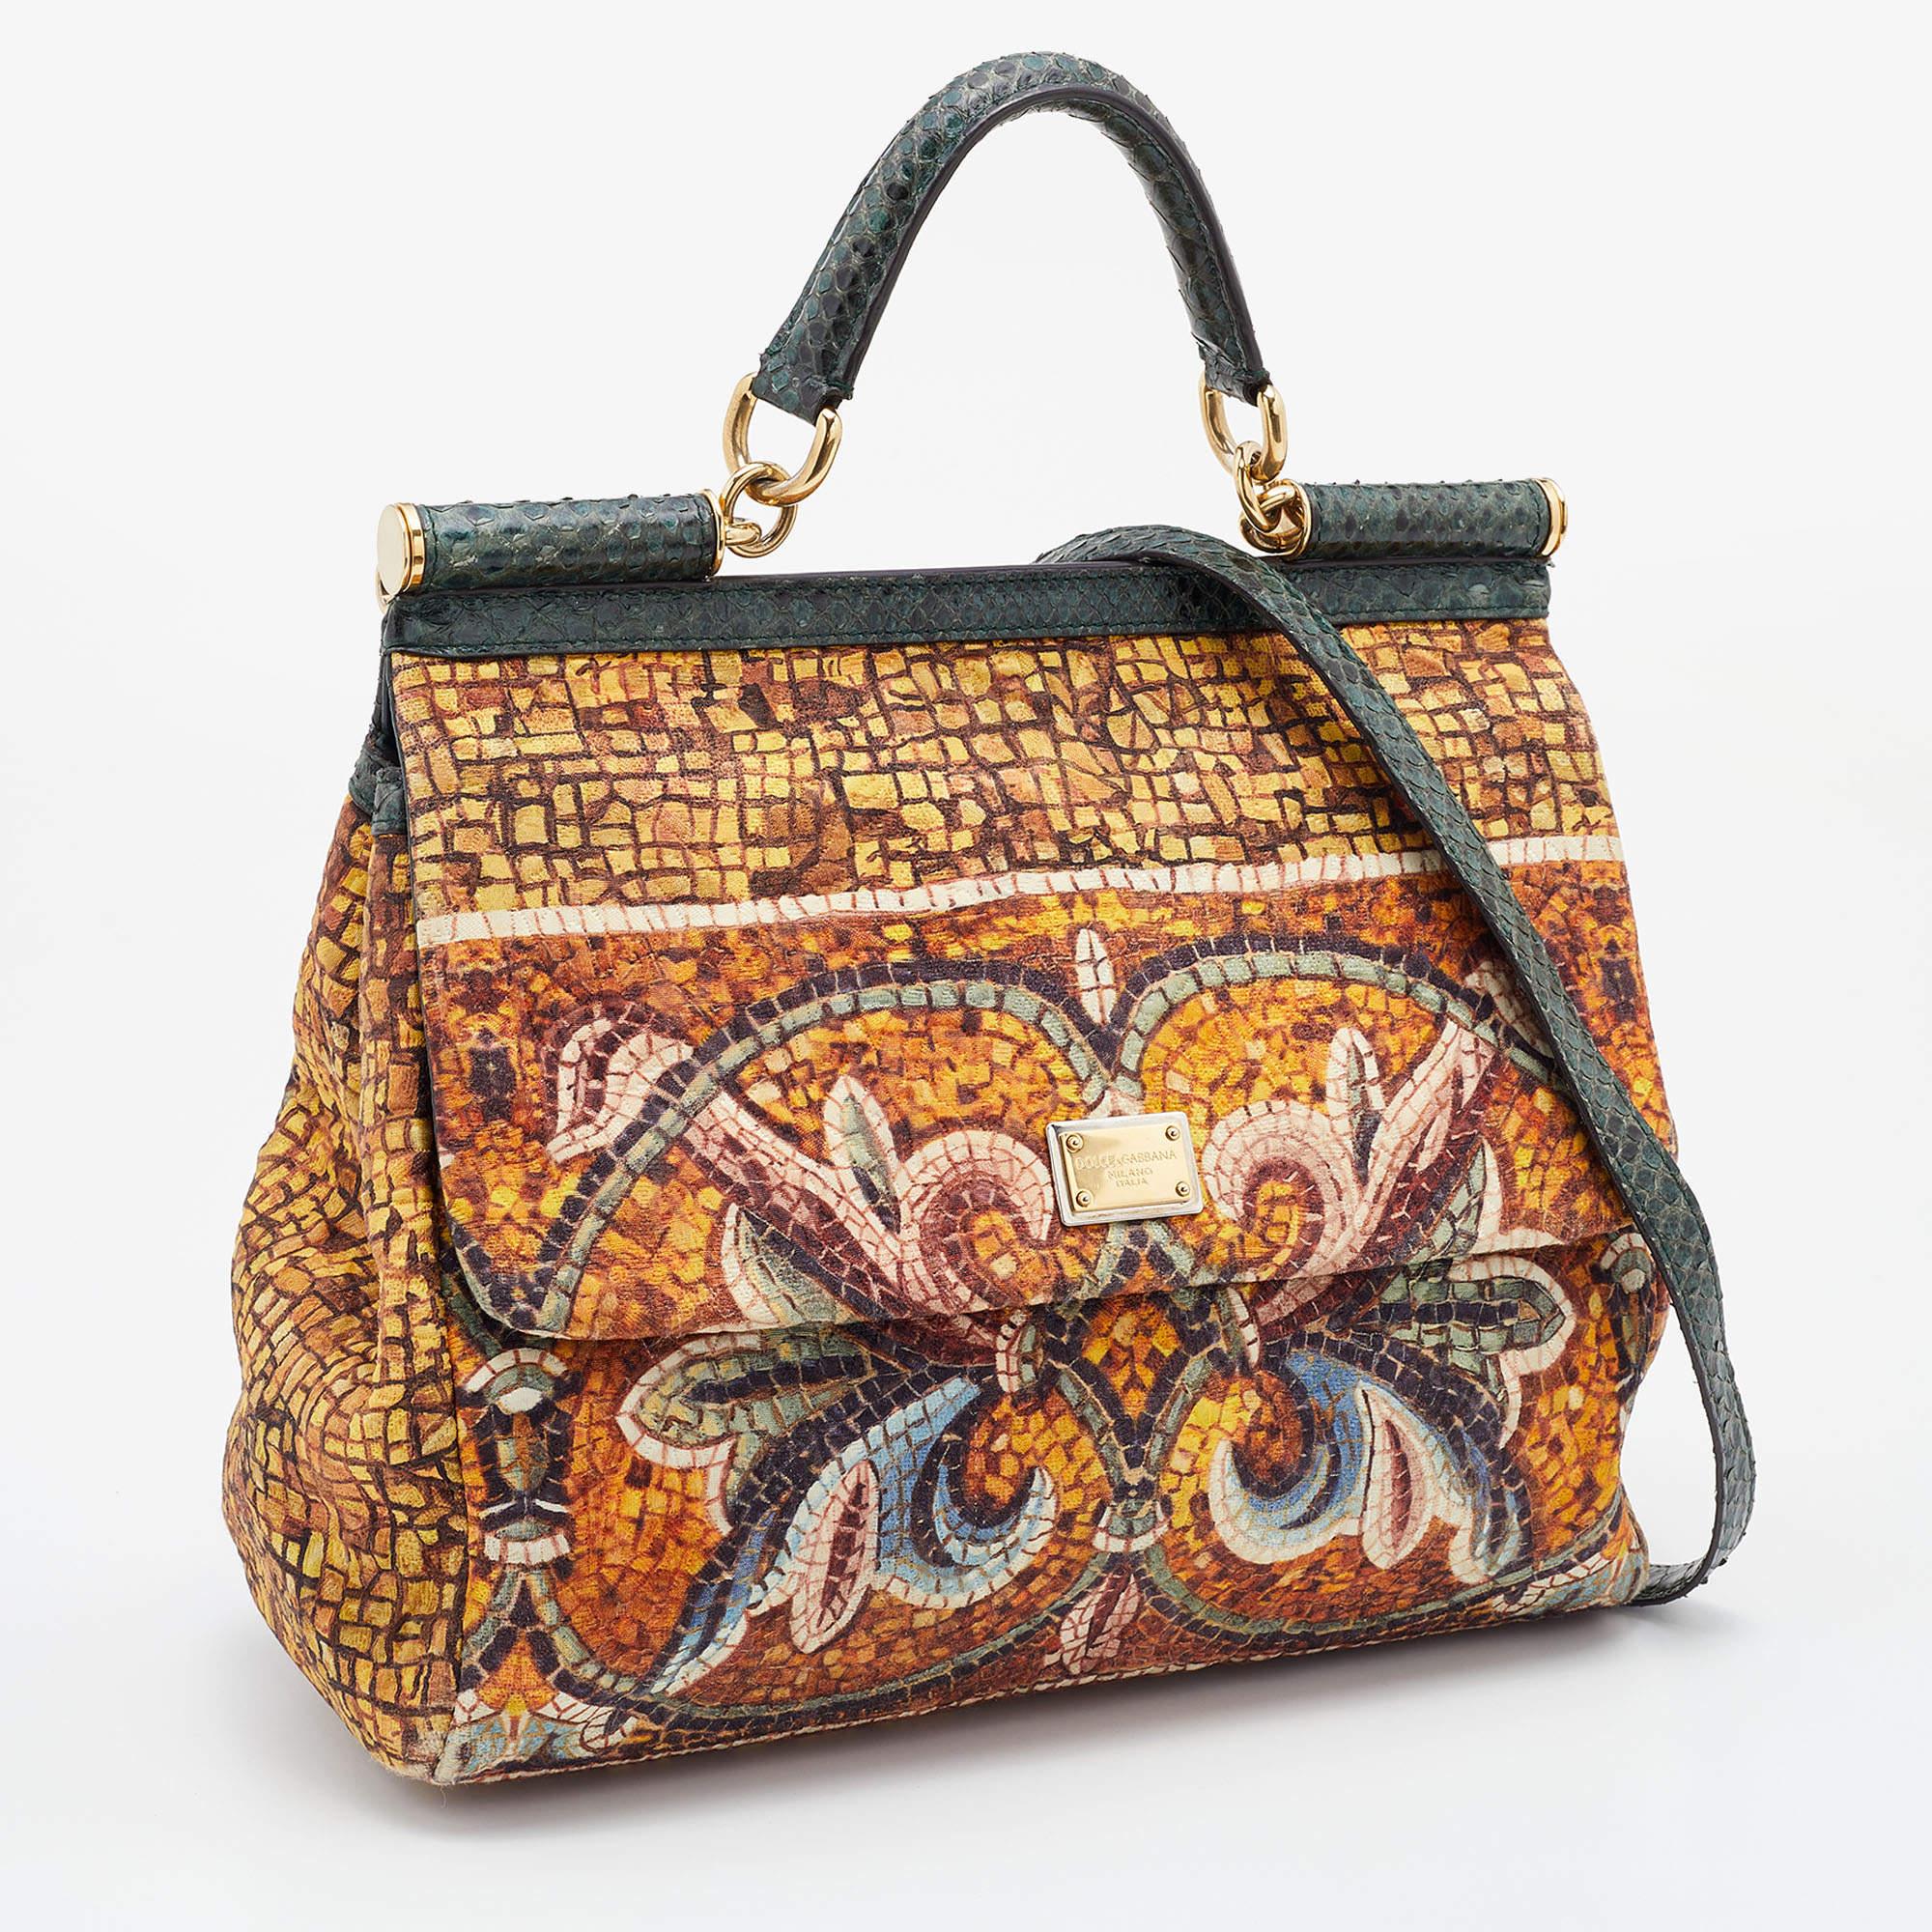 Presented for the 2009 Fall/Winter collection, Miss Sicily from Dolce & Gabbana represents the brand's regard for Italian essence and feminine style. This multicolor creation comes made from printed canvas and can be carried conveniently by a single